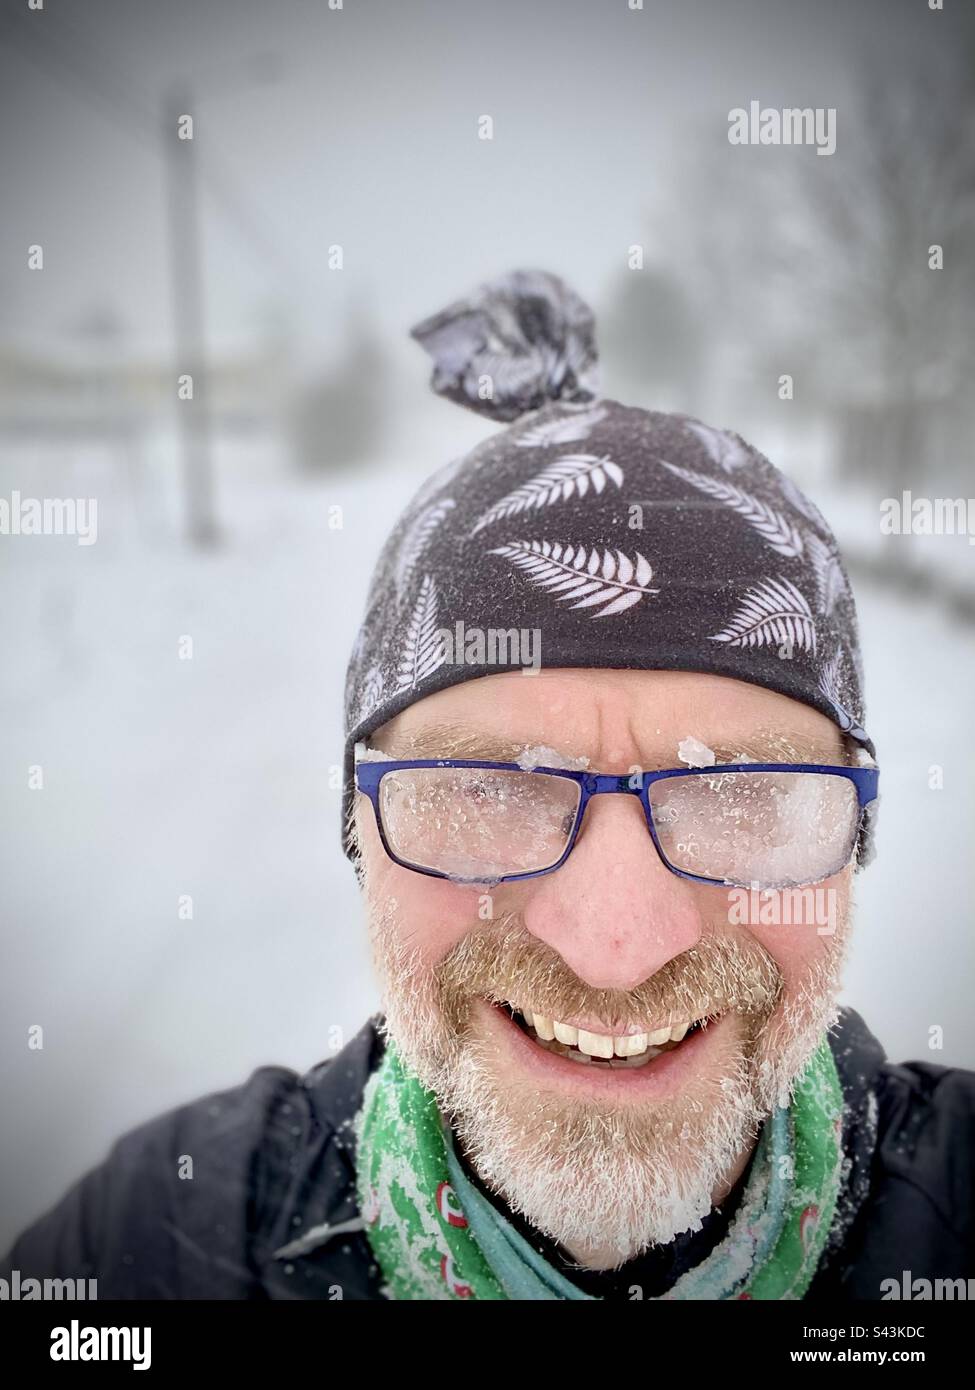 A funny selfie of a middle age man with steamed up glasses covered in sleet and an ice beard after running in a snowstorm during winter in Finland Stock Photo